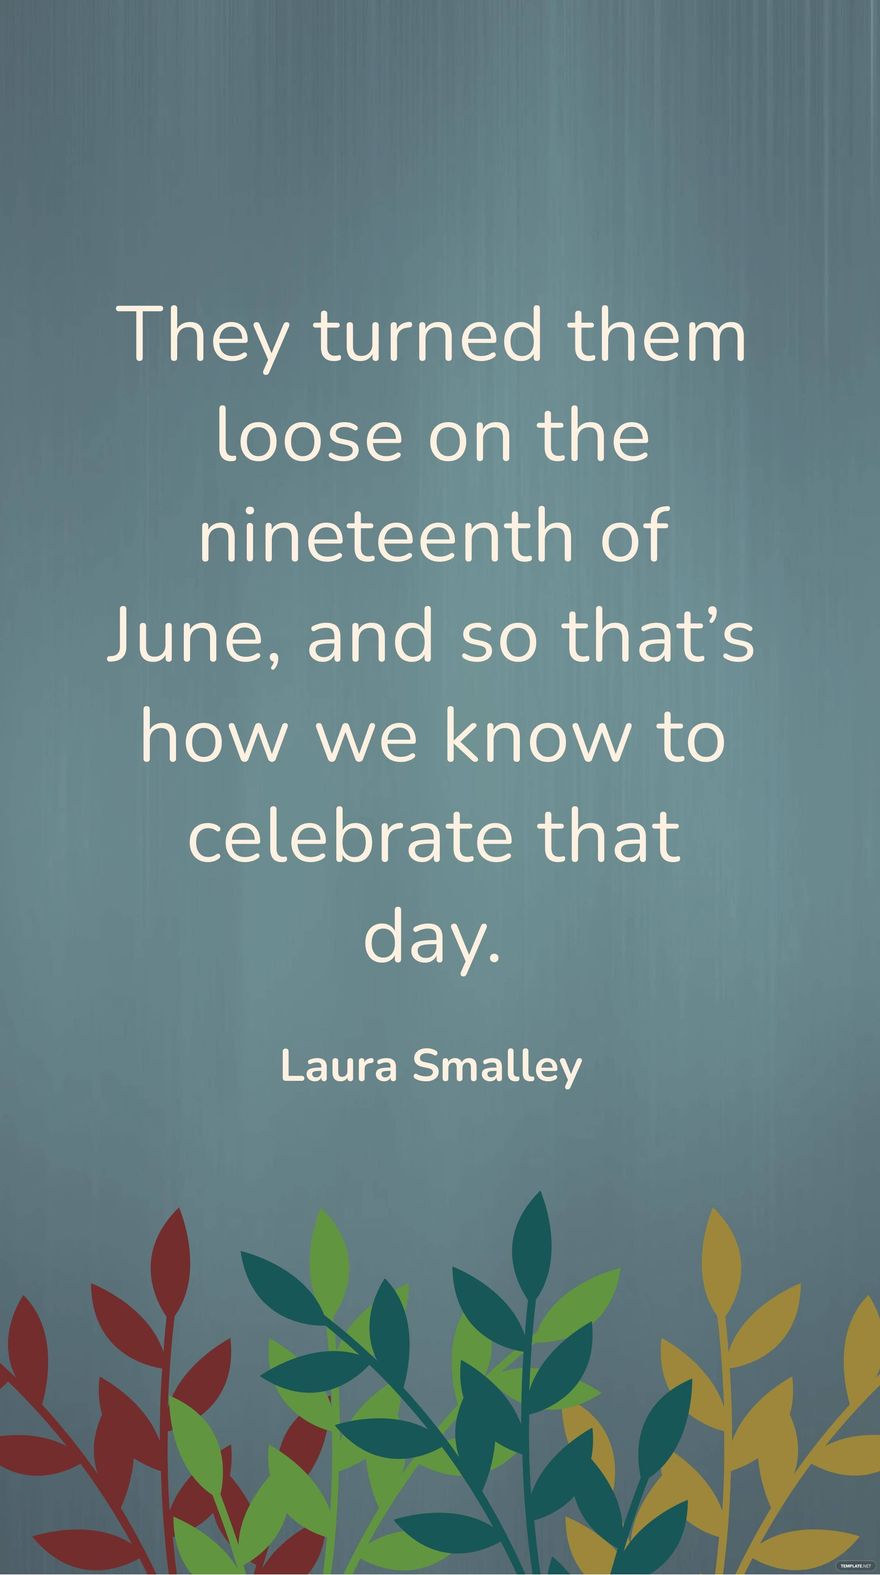 Laura Smalley - They turned them loose on the nineteenth of June, and so that’s how we know to celebrate that day. in JPG